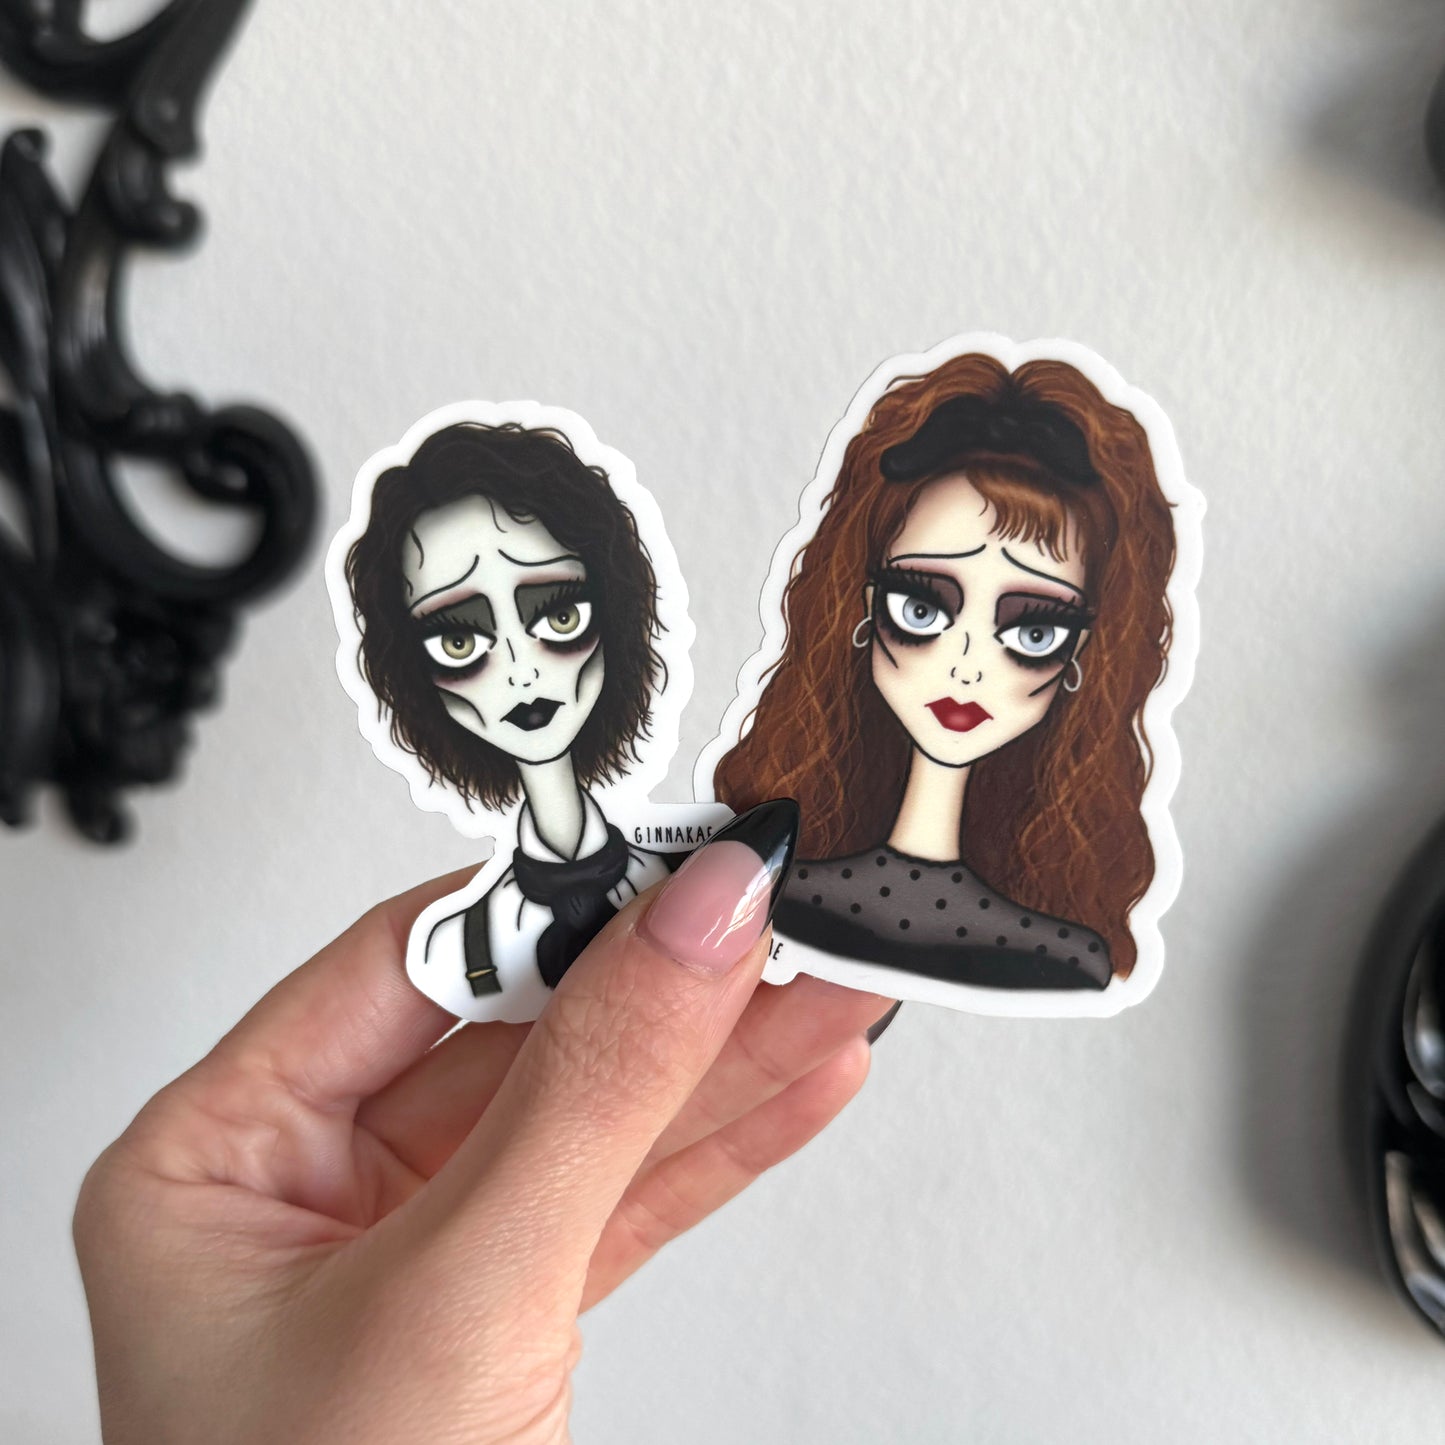 NEW! Lisa Frankenstein and the Creature Prints + Stickers